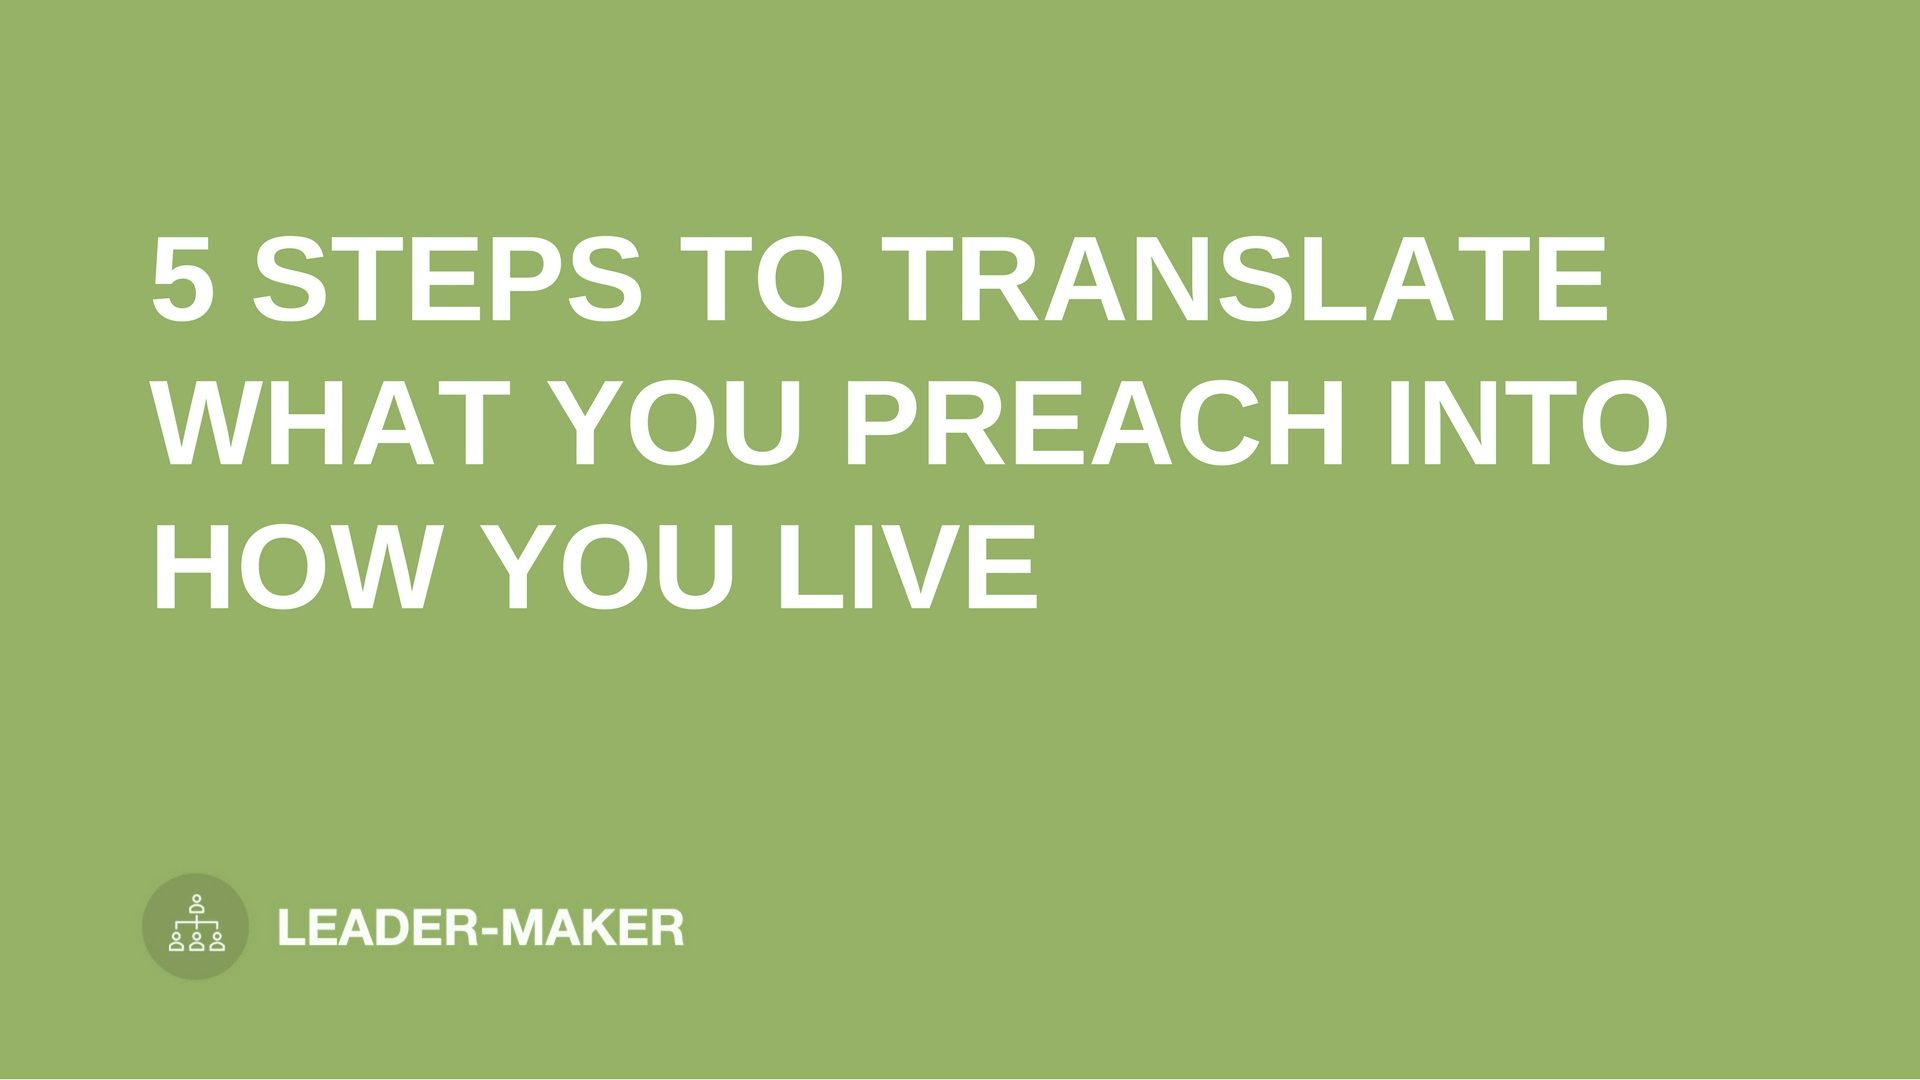 text "5 STEPS TO TRANSLATE WHAT YOU PREACH INTO HOW YOU LIVE" on green background leaders.church